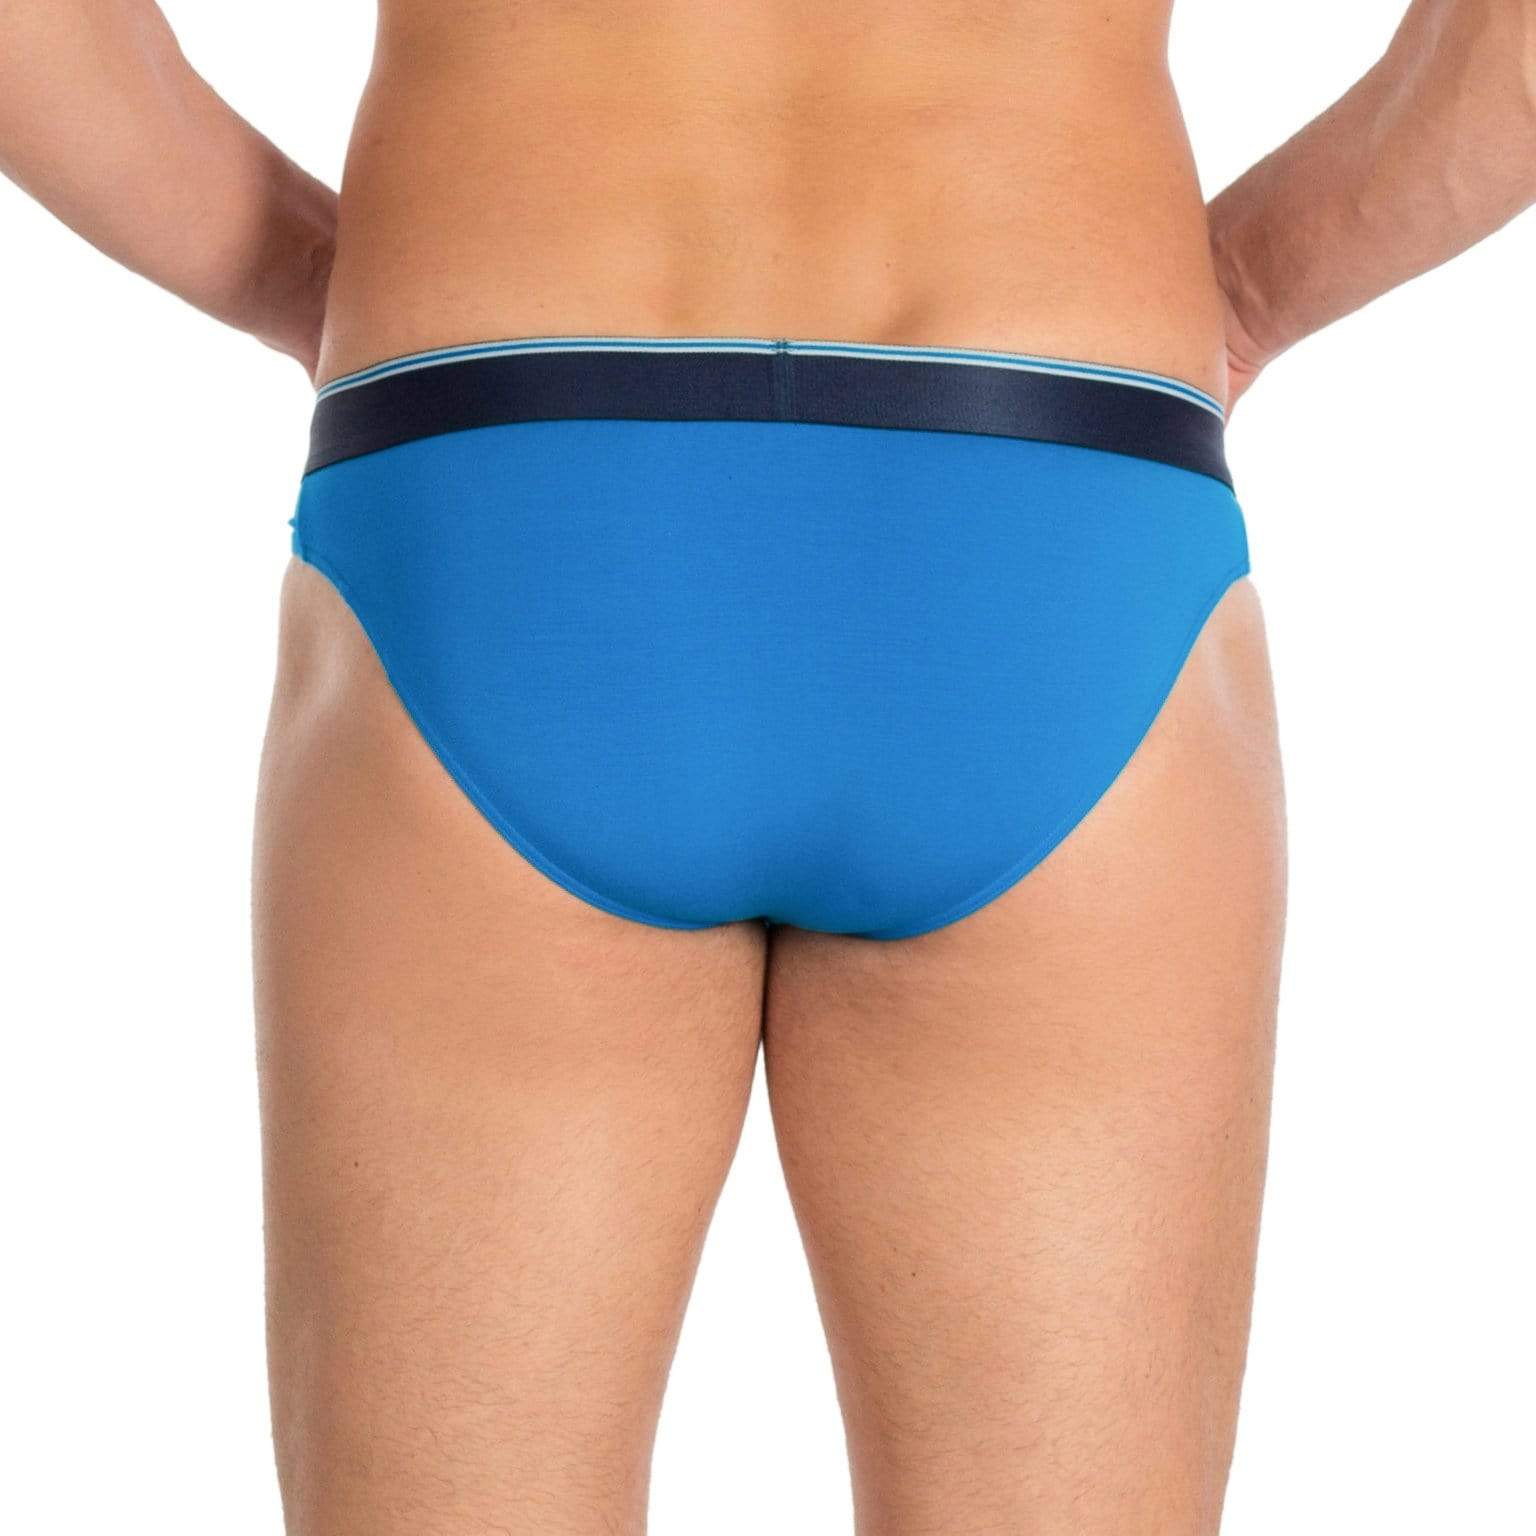 PrimeMan AnatoMAX Hipster Brief MAR M by Obviously